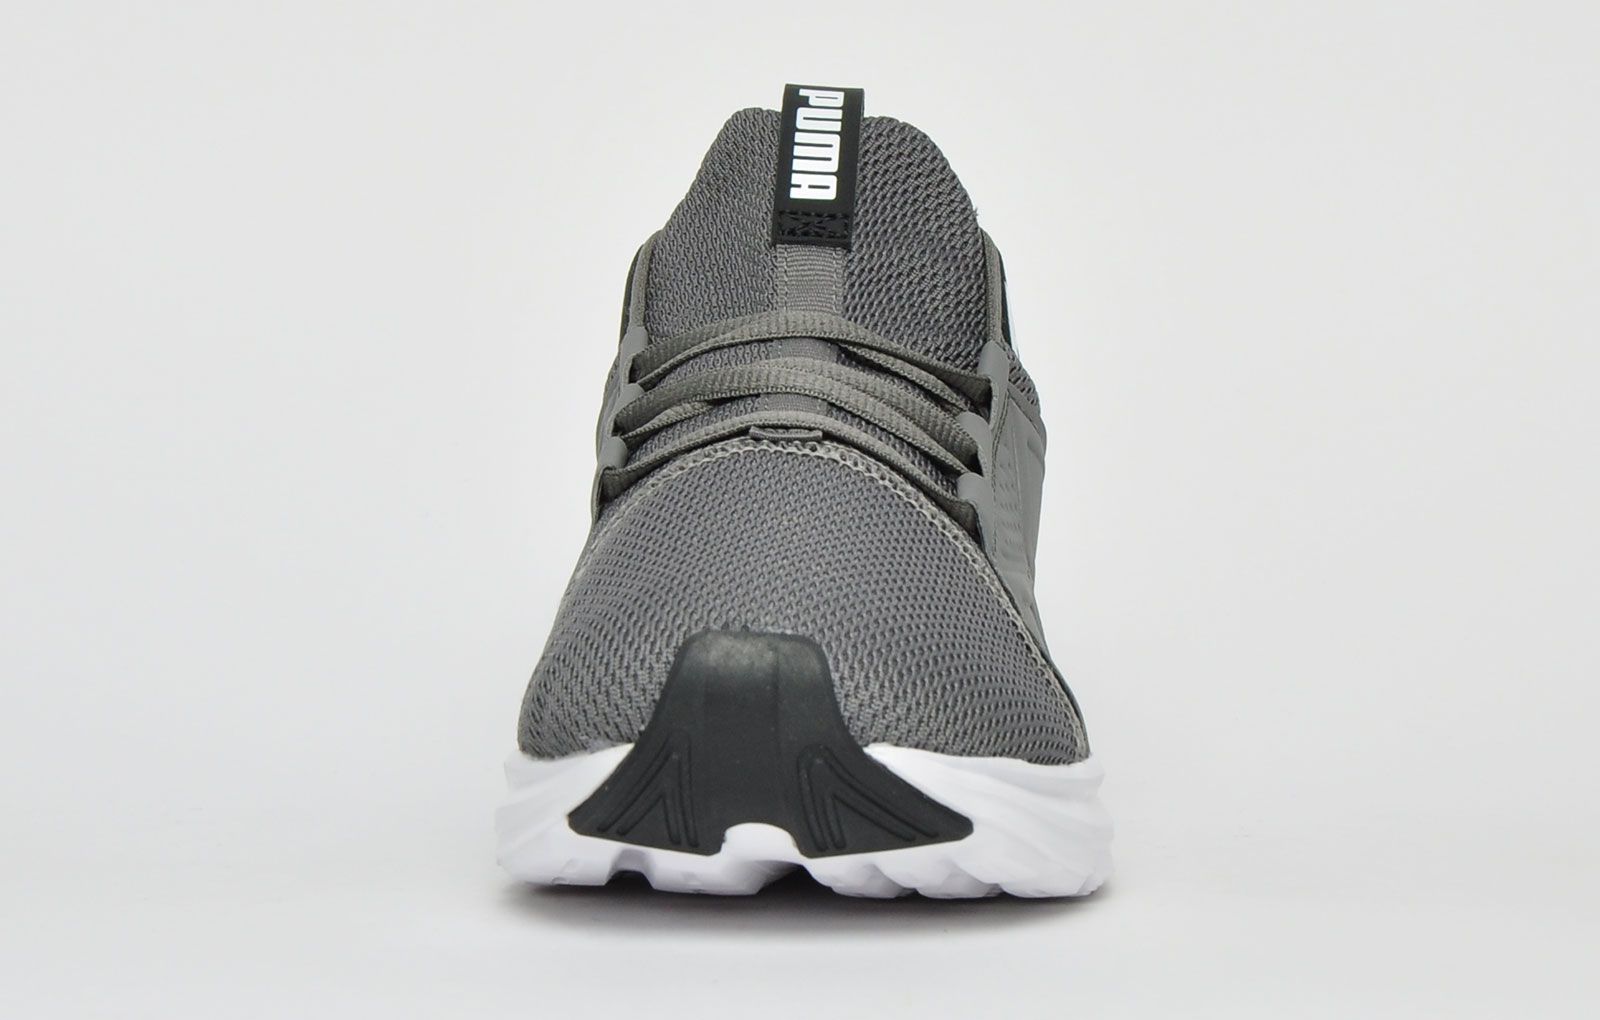 <p>The Puma Enzo was designed as a lightweight workout shoe featuring a breathable mesh upper with an exaggerated tongue and collar to provide ankle support and style.</p> <p>Featuring a synthetic material that works as an external heel counter holding the foot steady during aggressive exercise with an EVA foam midsole keeping the foot comfortable and protected by absorbing the shock.</p> <p>A SoftFoam sock liner provides soft, plush cushioning under the foot whilst the durable outsole with flex grooves delivers additional durability and traction</p> <p>- Textile mesh synthetic mixupper</p> <p>- External heel counter for heel lockdown</p> <p>- Integrated lacing system </p> <p>- SoftFoam sock liner</p> <p>- EVA foam midsole for shock absorption</p> <p>- Midfoot strap for additional support and lock down fit</p> <p>- Padded heel collar with heel tab</p> <p>- Heel loop for easy on off wear</p> <p>- Puma branding throughout</p>